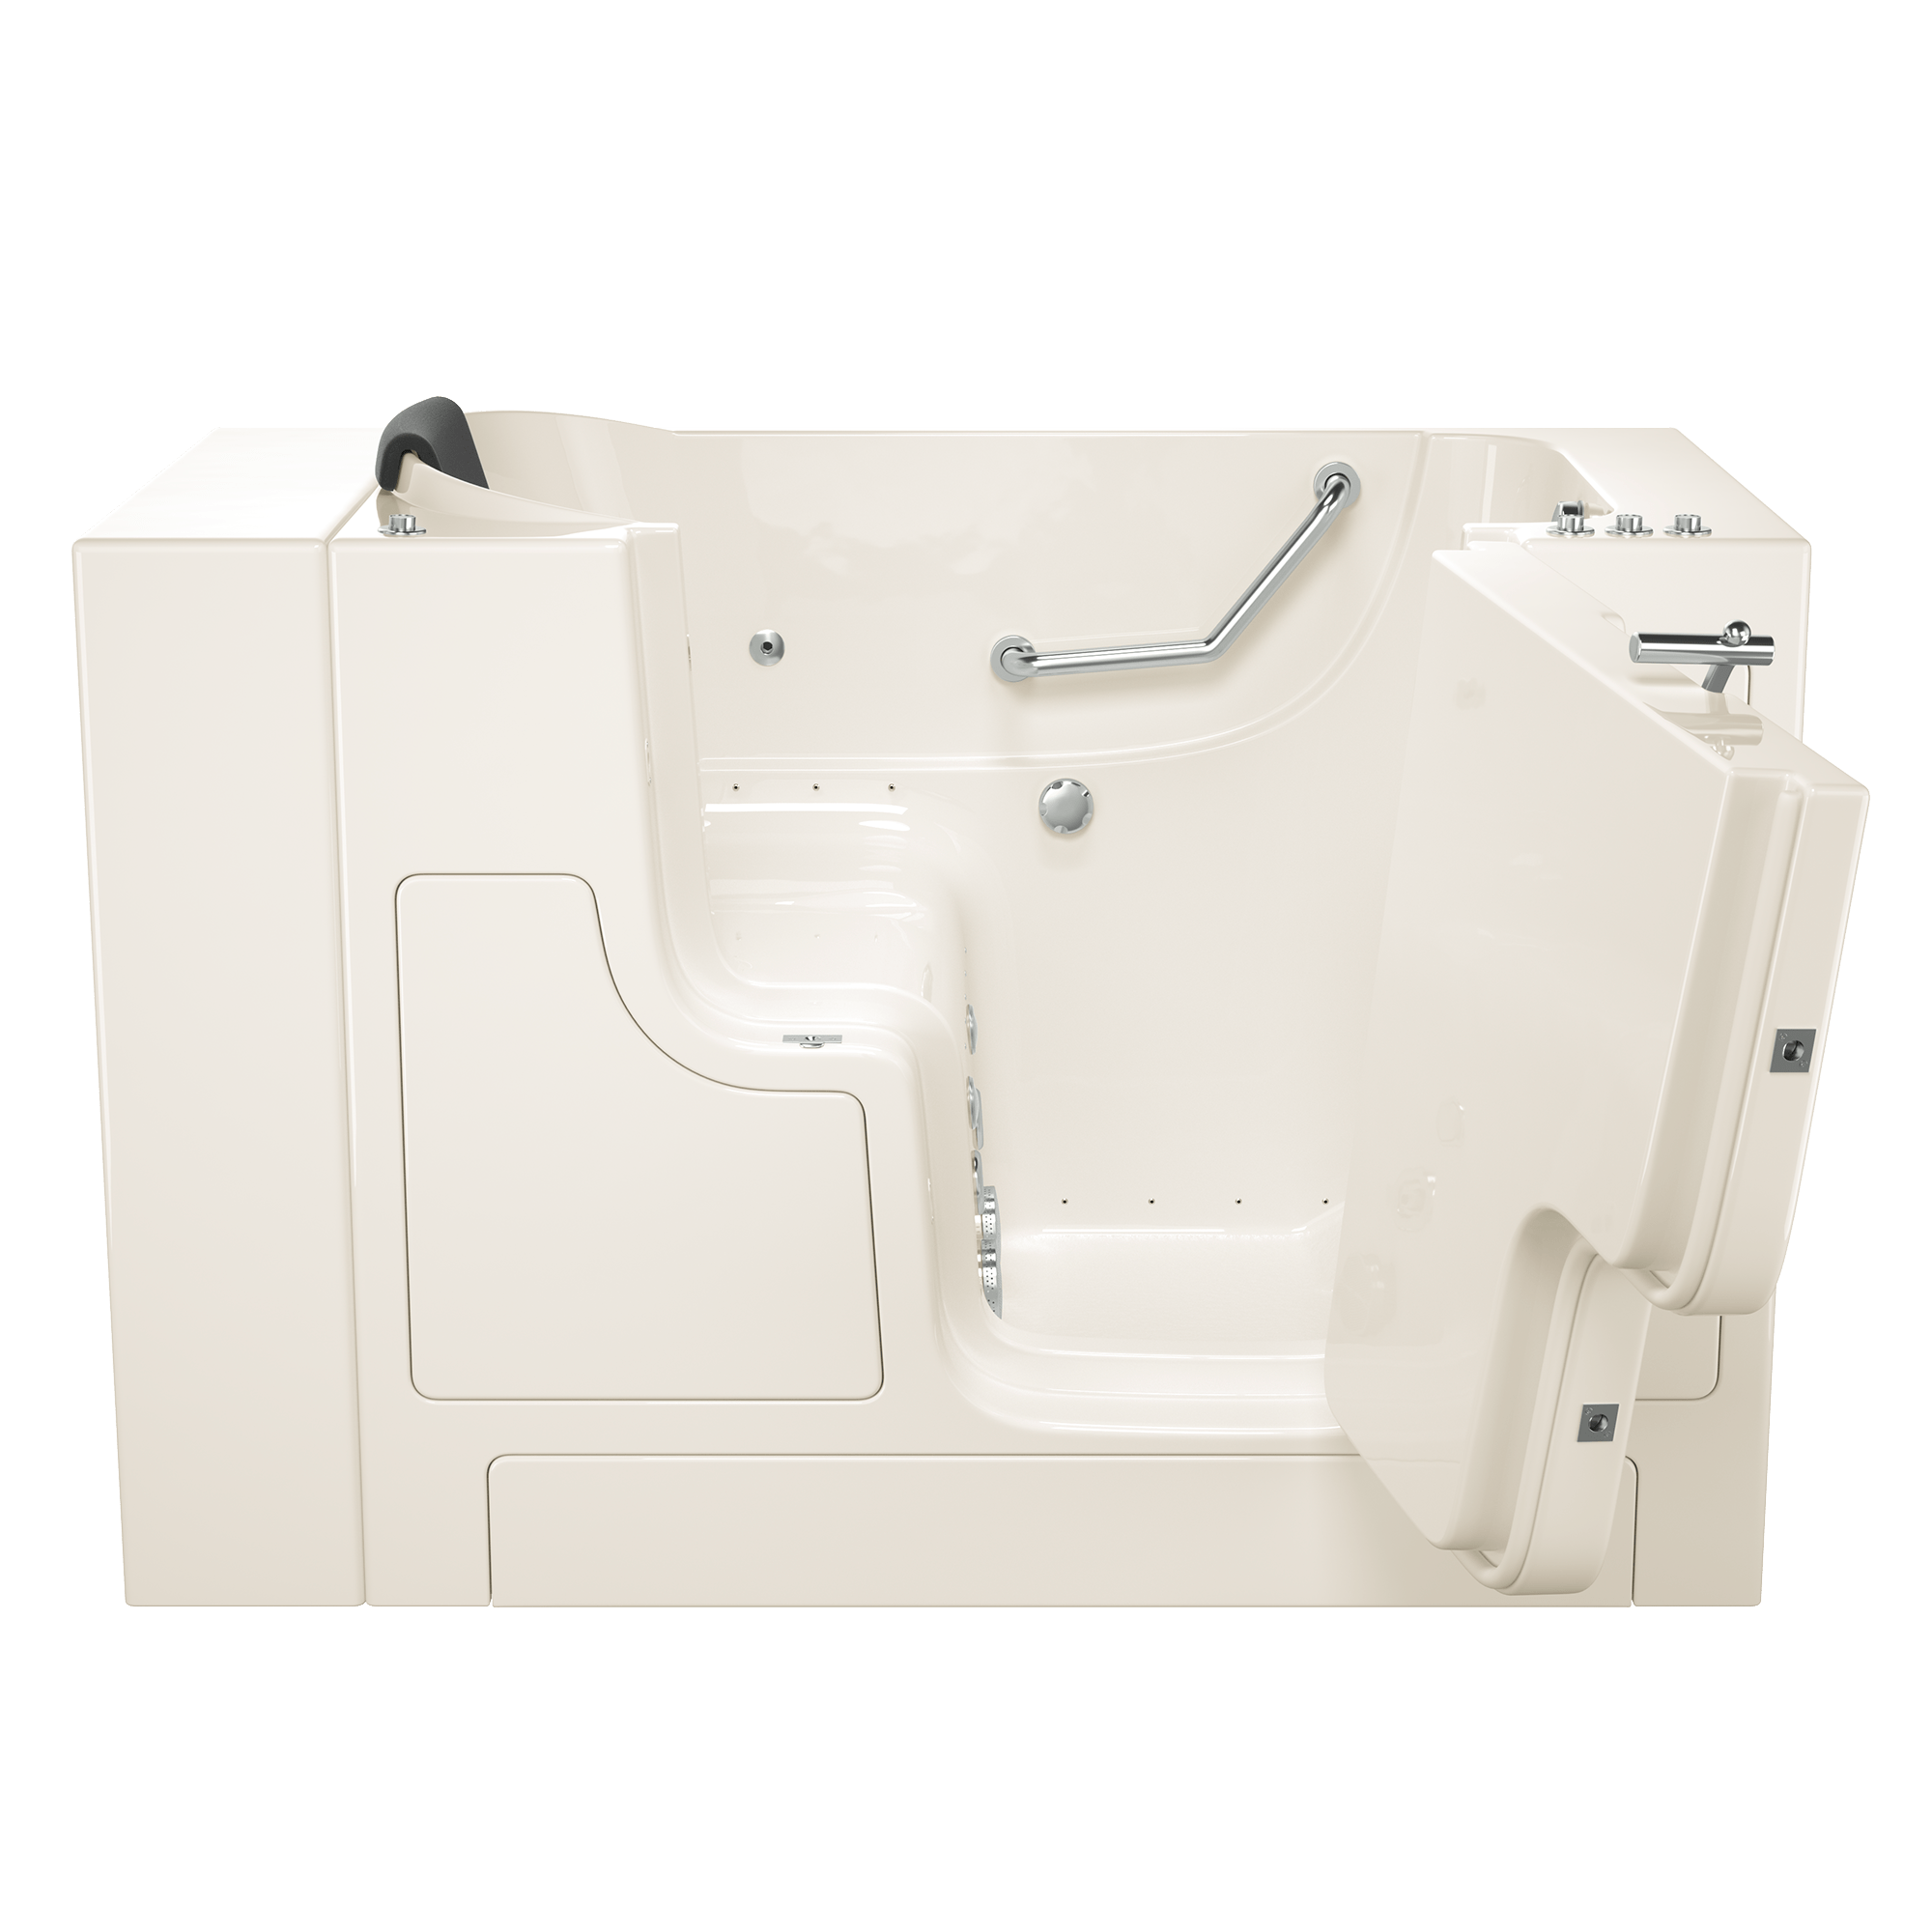 Gelcoat Premium Series 30 x 52 -Inch Walk-in Tub With Combination Air Spa and Whirlpool Systems - Right-Hand Drain